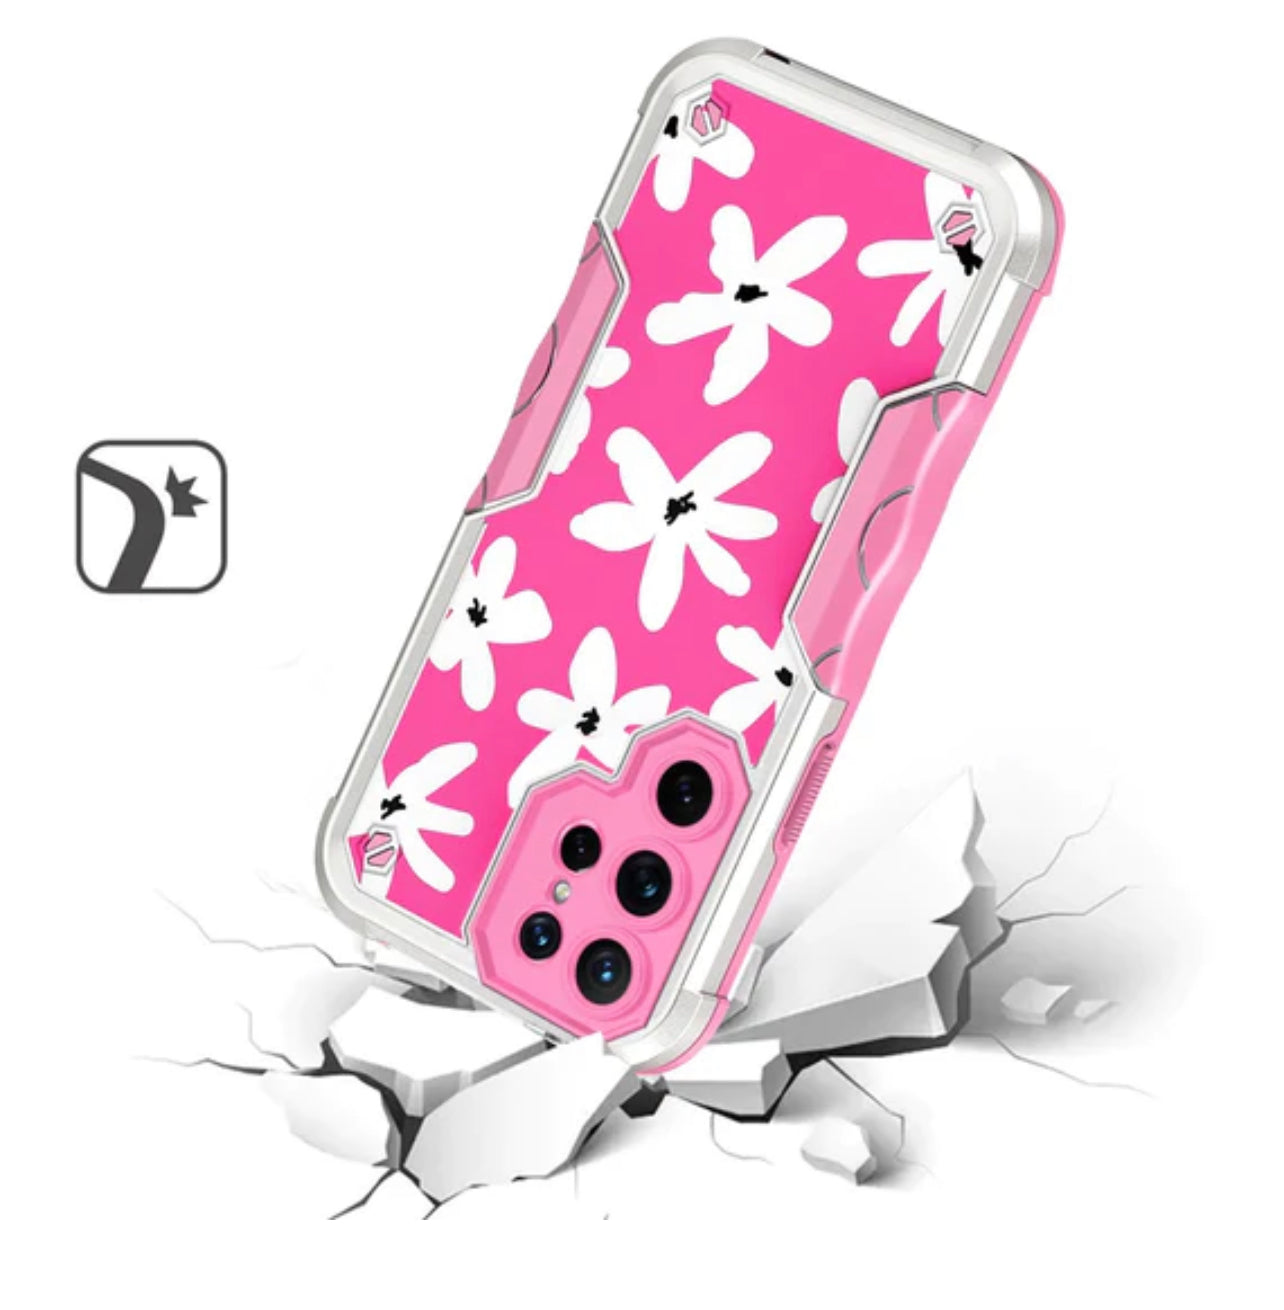 Samsung S23 Ultra Tough Strong Dual Layer Flat Hybrid Case Cover